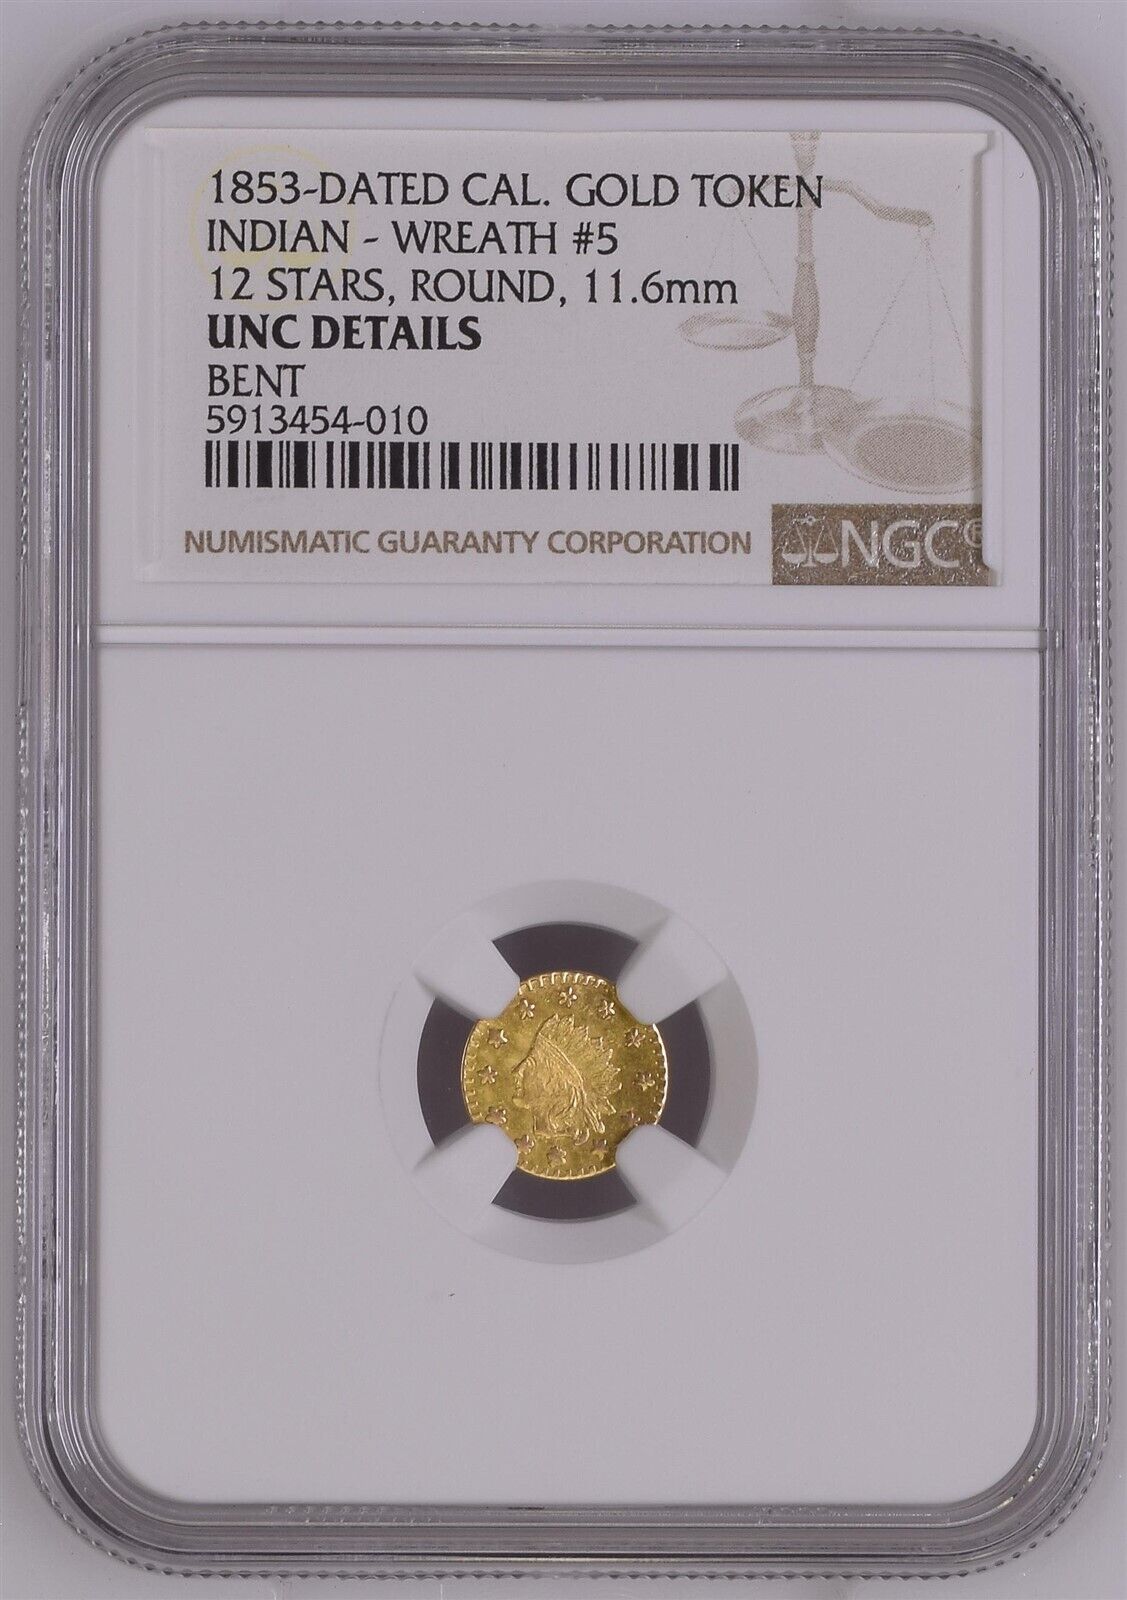 FROSTED 1853 CALIFORNIA GOLD INDIAN - WREATH #5 12 STARS, ROUND / NGC UNC